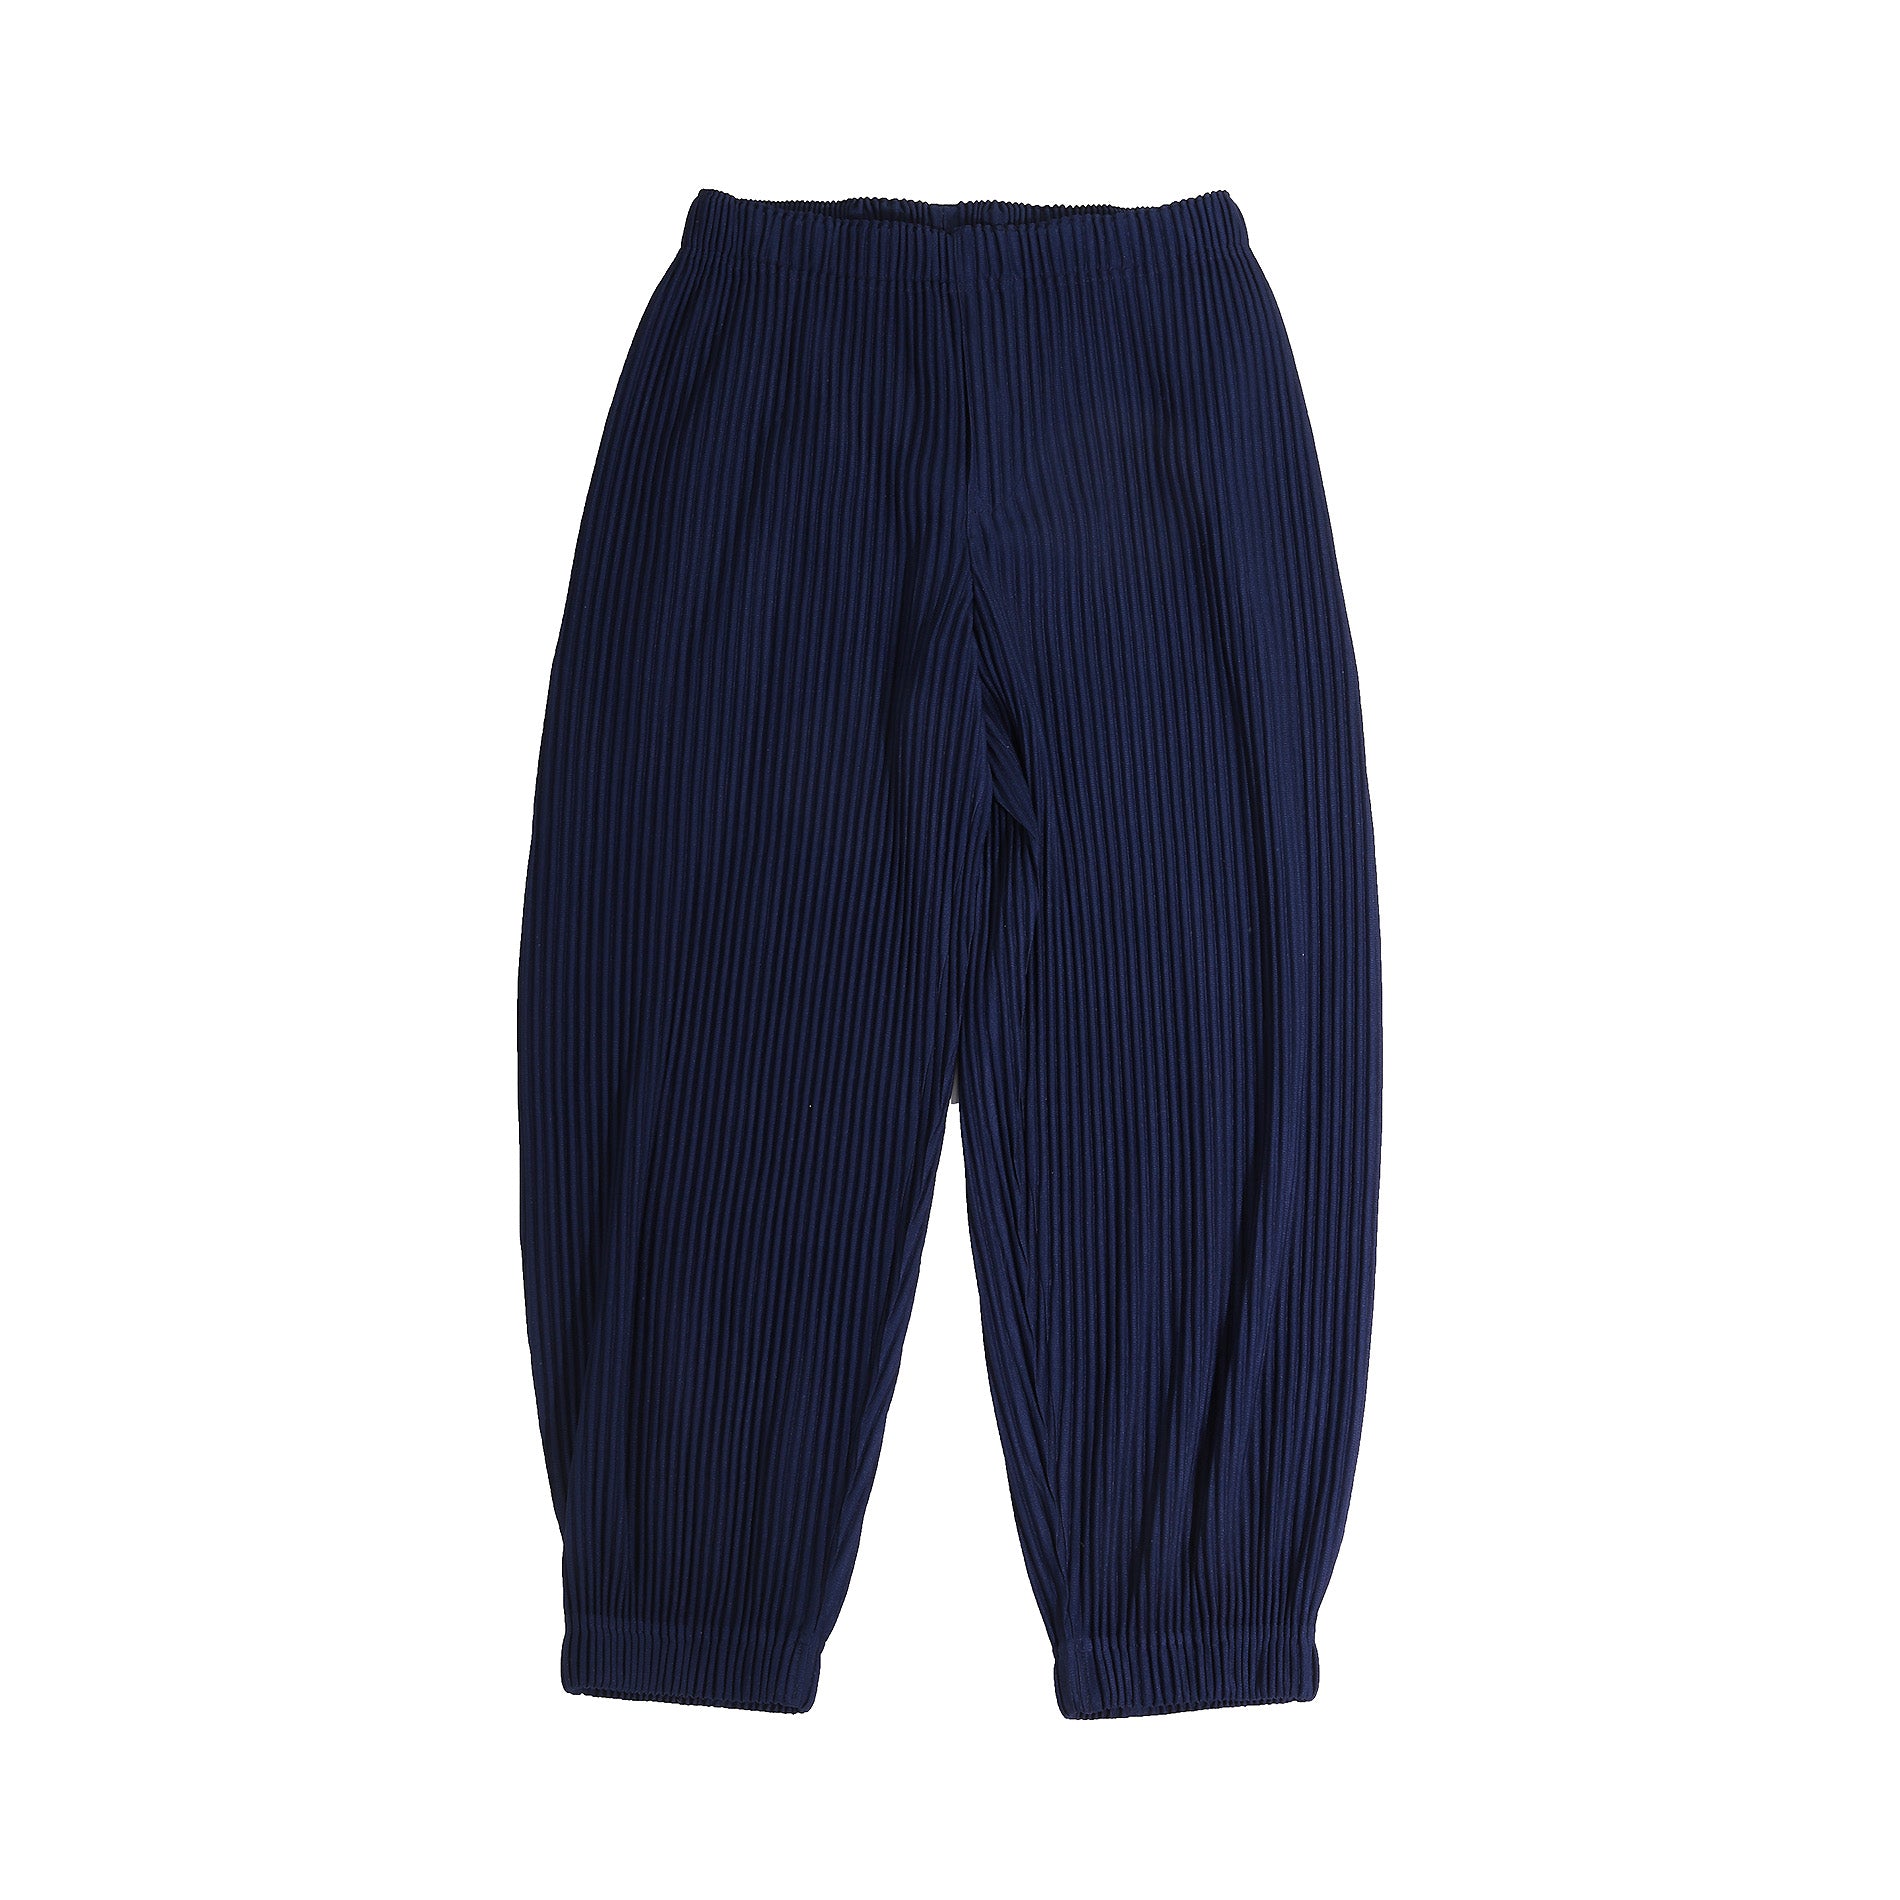 Issey Miyake Homme Plissé JF116 Cuffed Pleated Pants